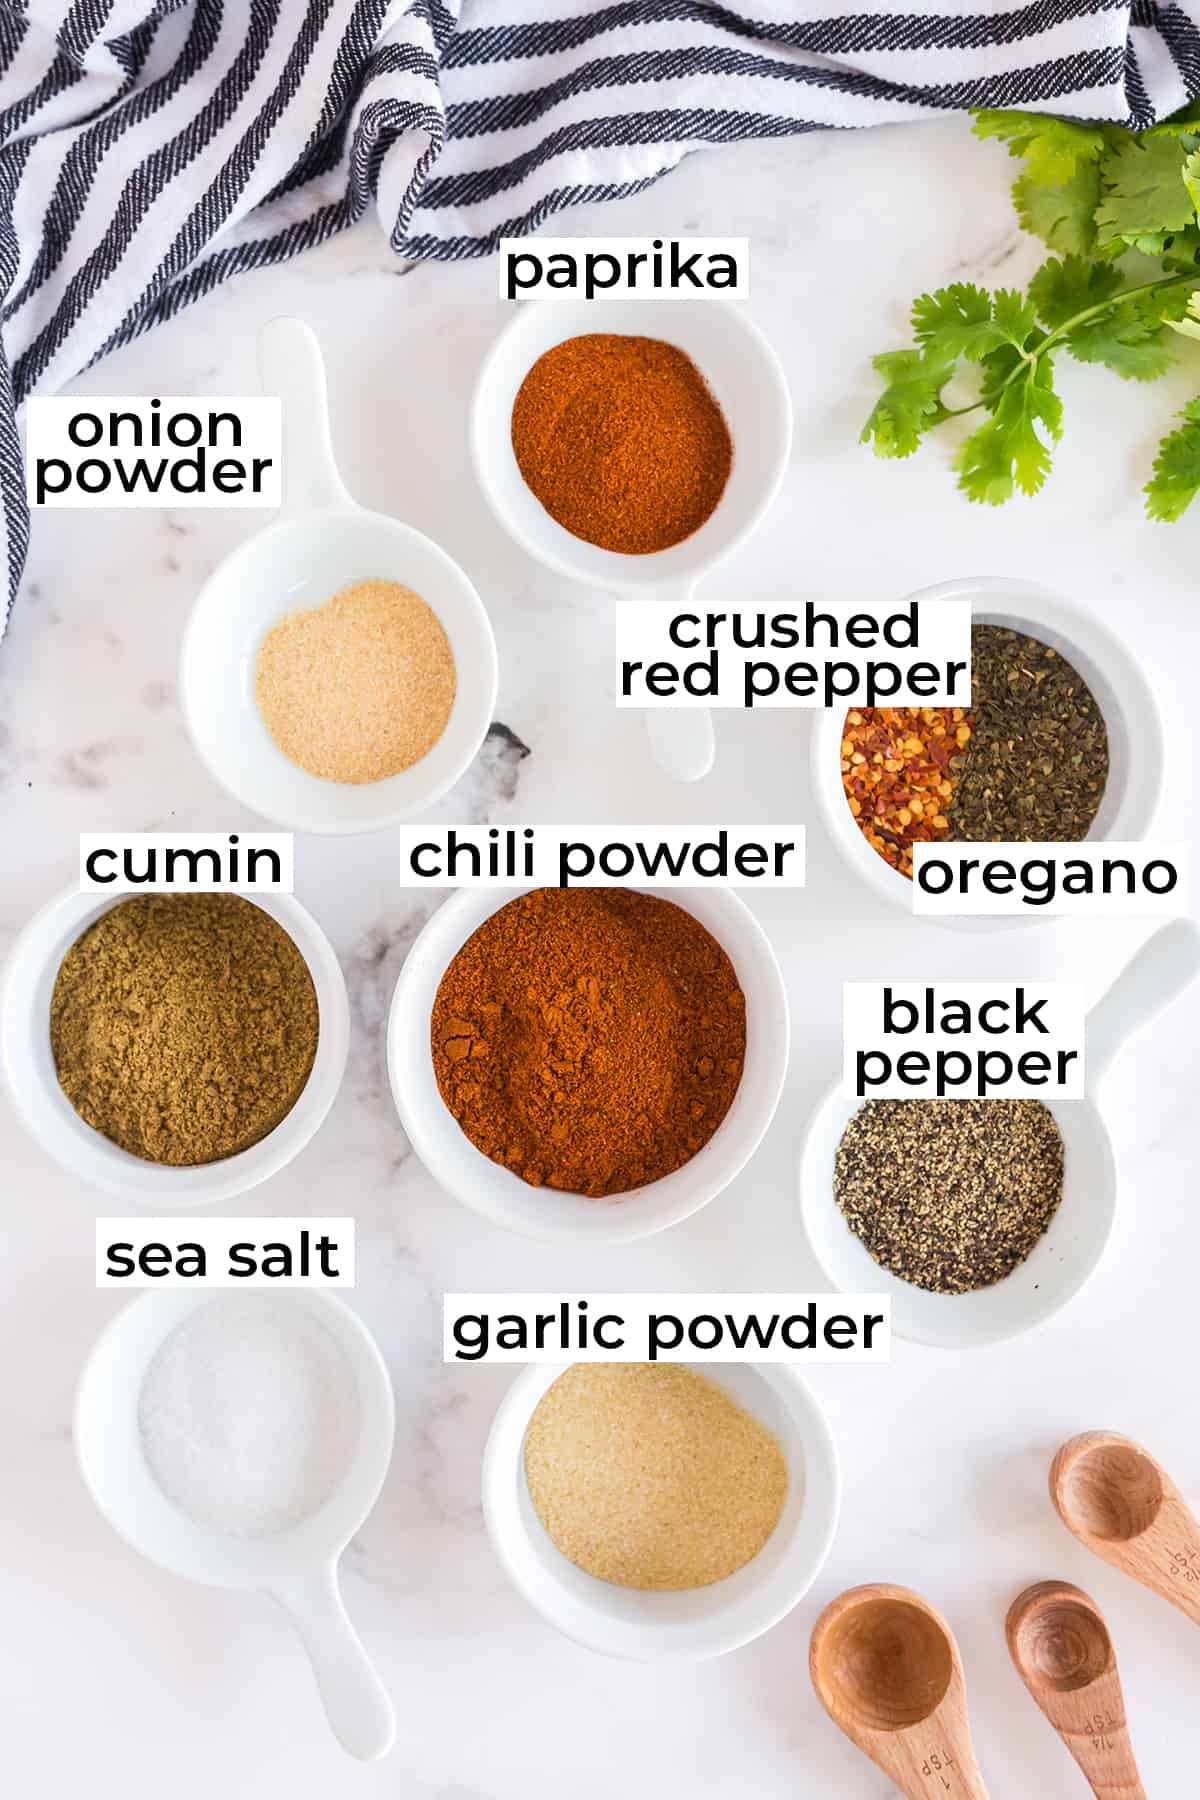 The ingredients for Homemade Taco Seasoning Mix.